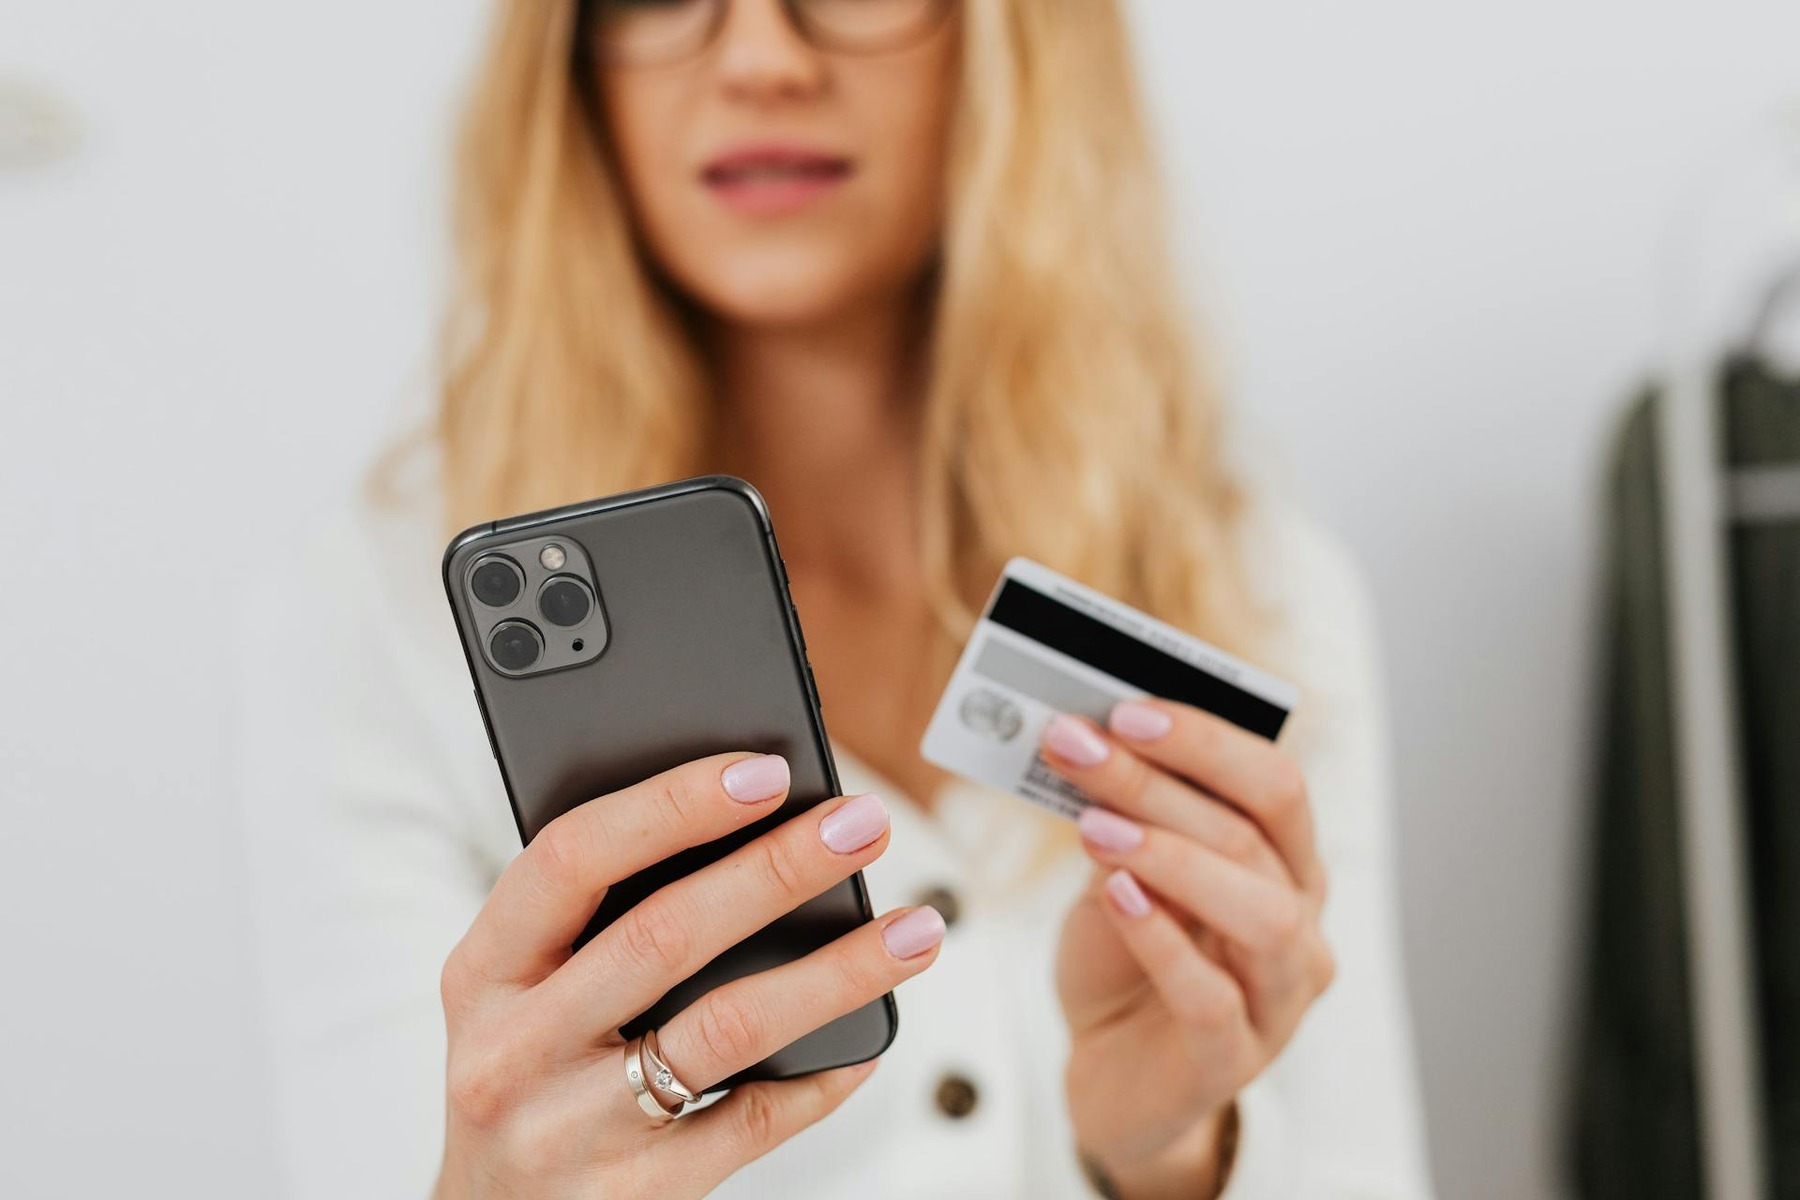 A woman holding a credit card and a smartphone, ready for online shopping and making secure transactions